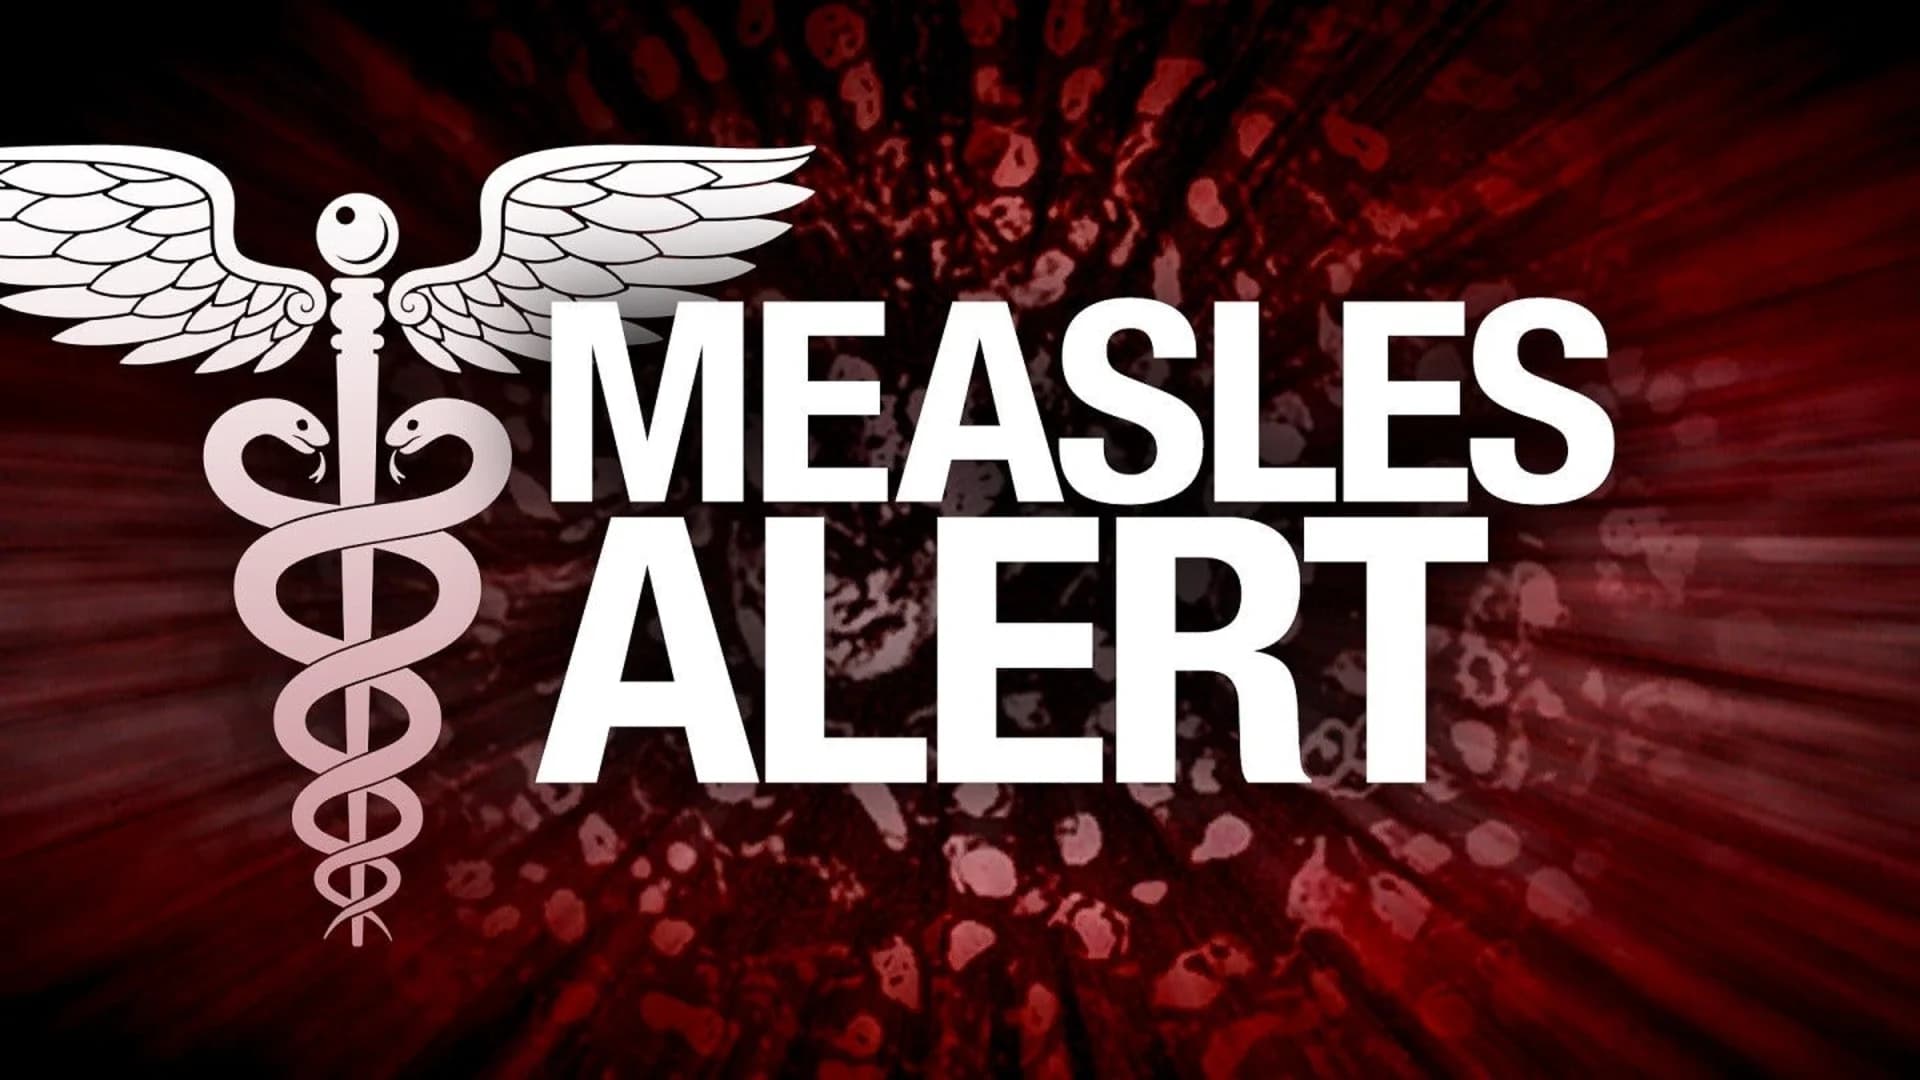 Health officials warn of more measles risks in Ocean County